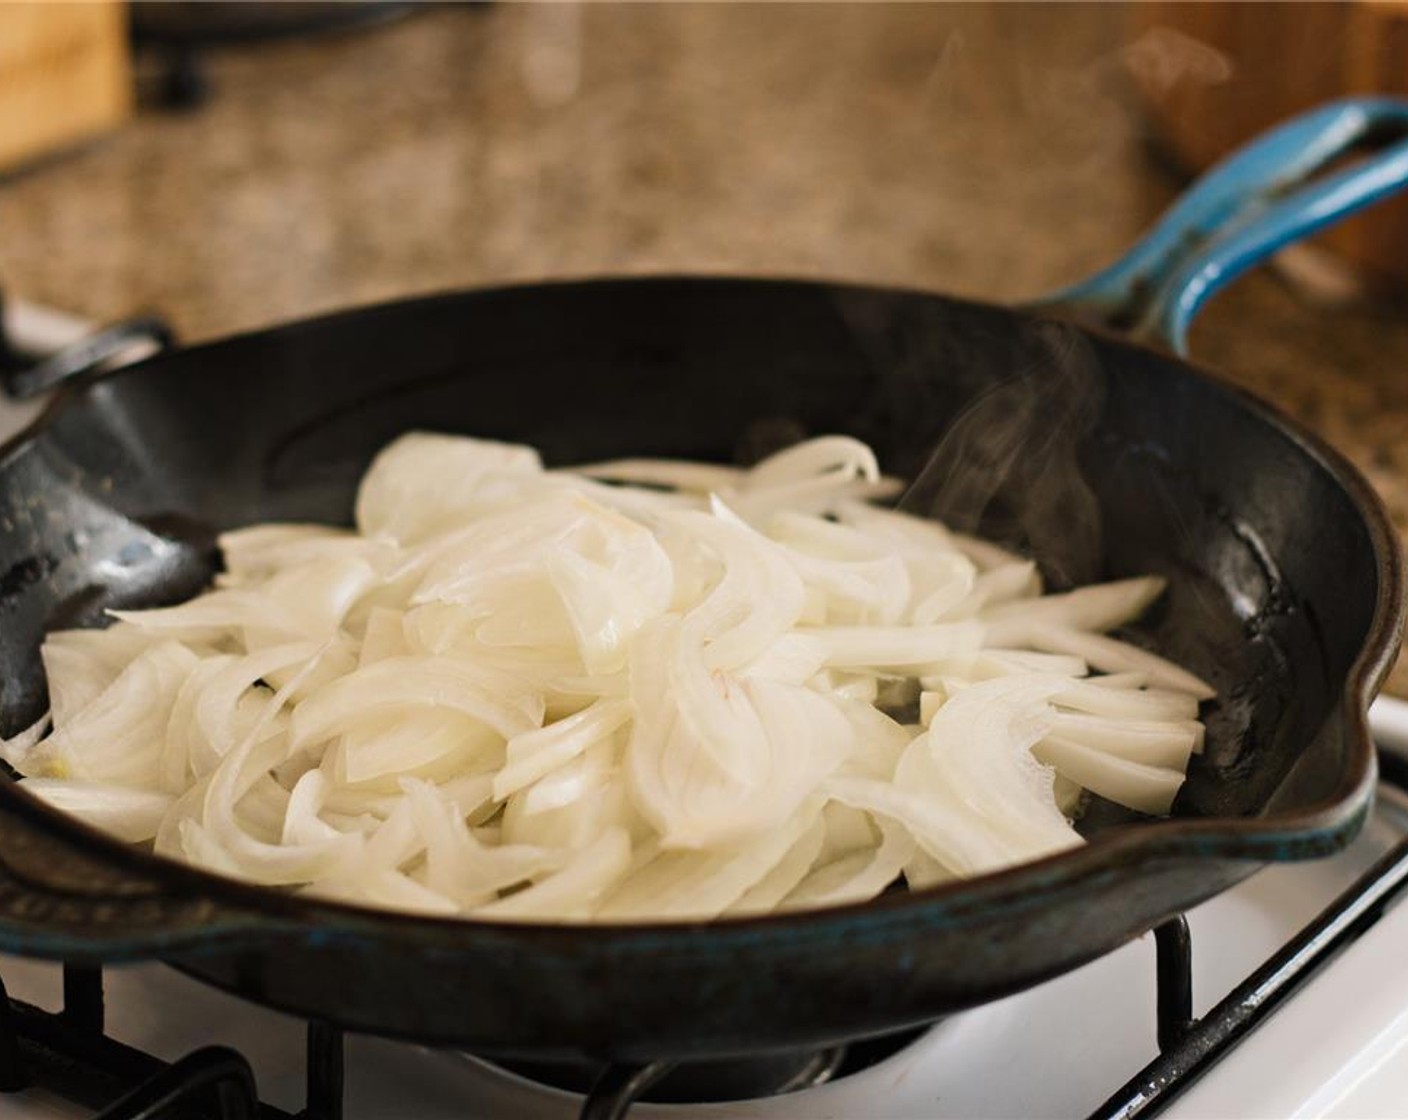 step 7 Heat a skillet over low heat and add 2 tablespoons of butter and the onions. Caramelize for 45 minutes to 1 hour, stirring occasionally, until the onions are golden brown. Add a pinch of salt to taste.